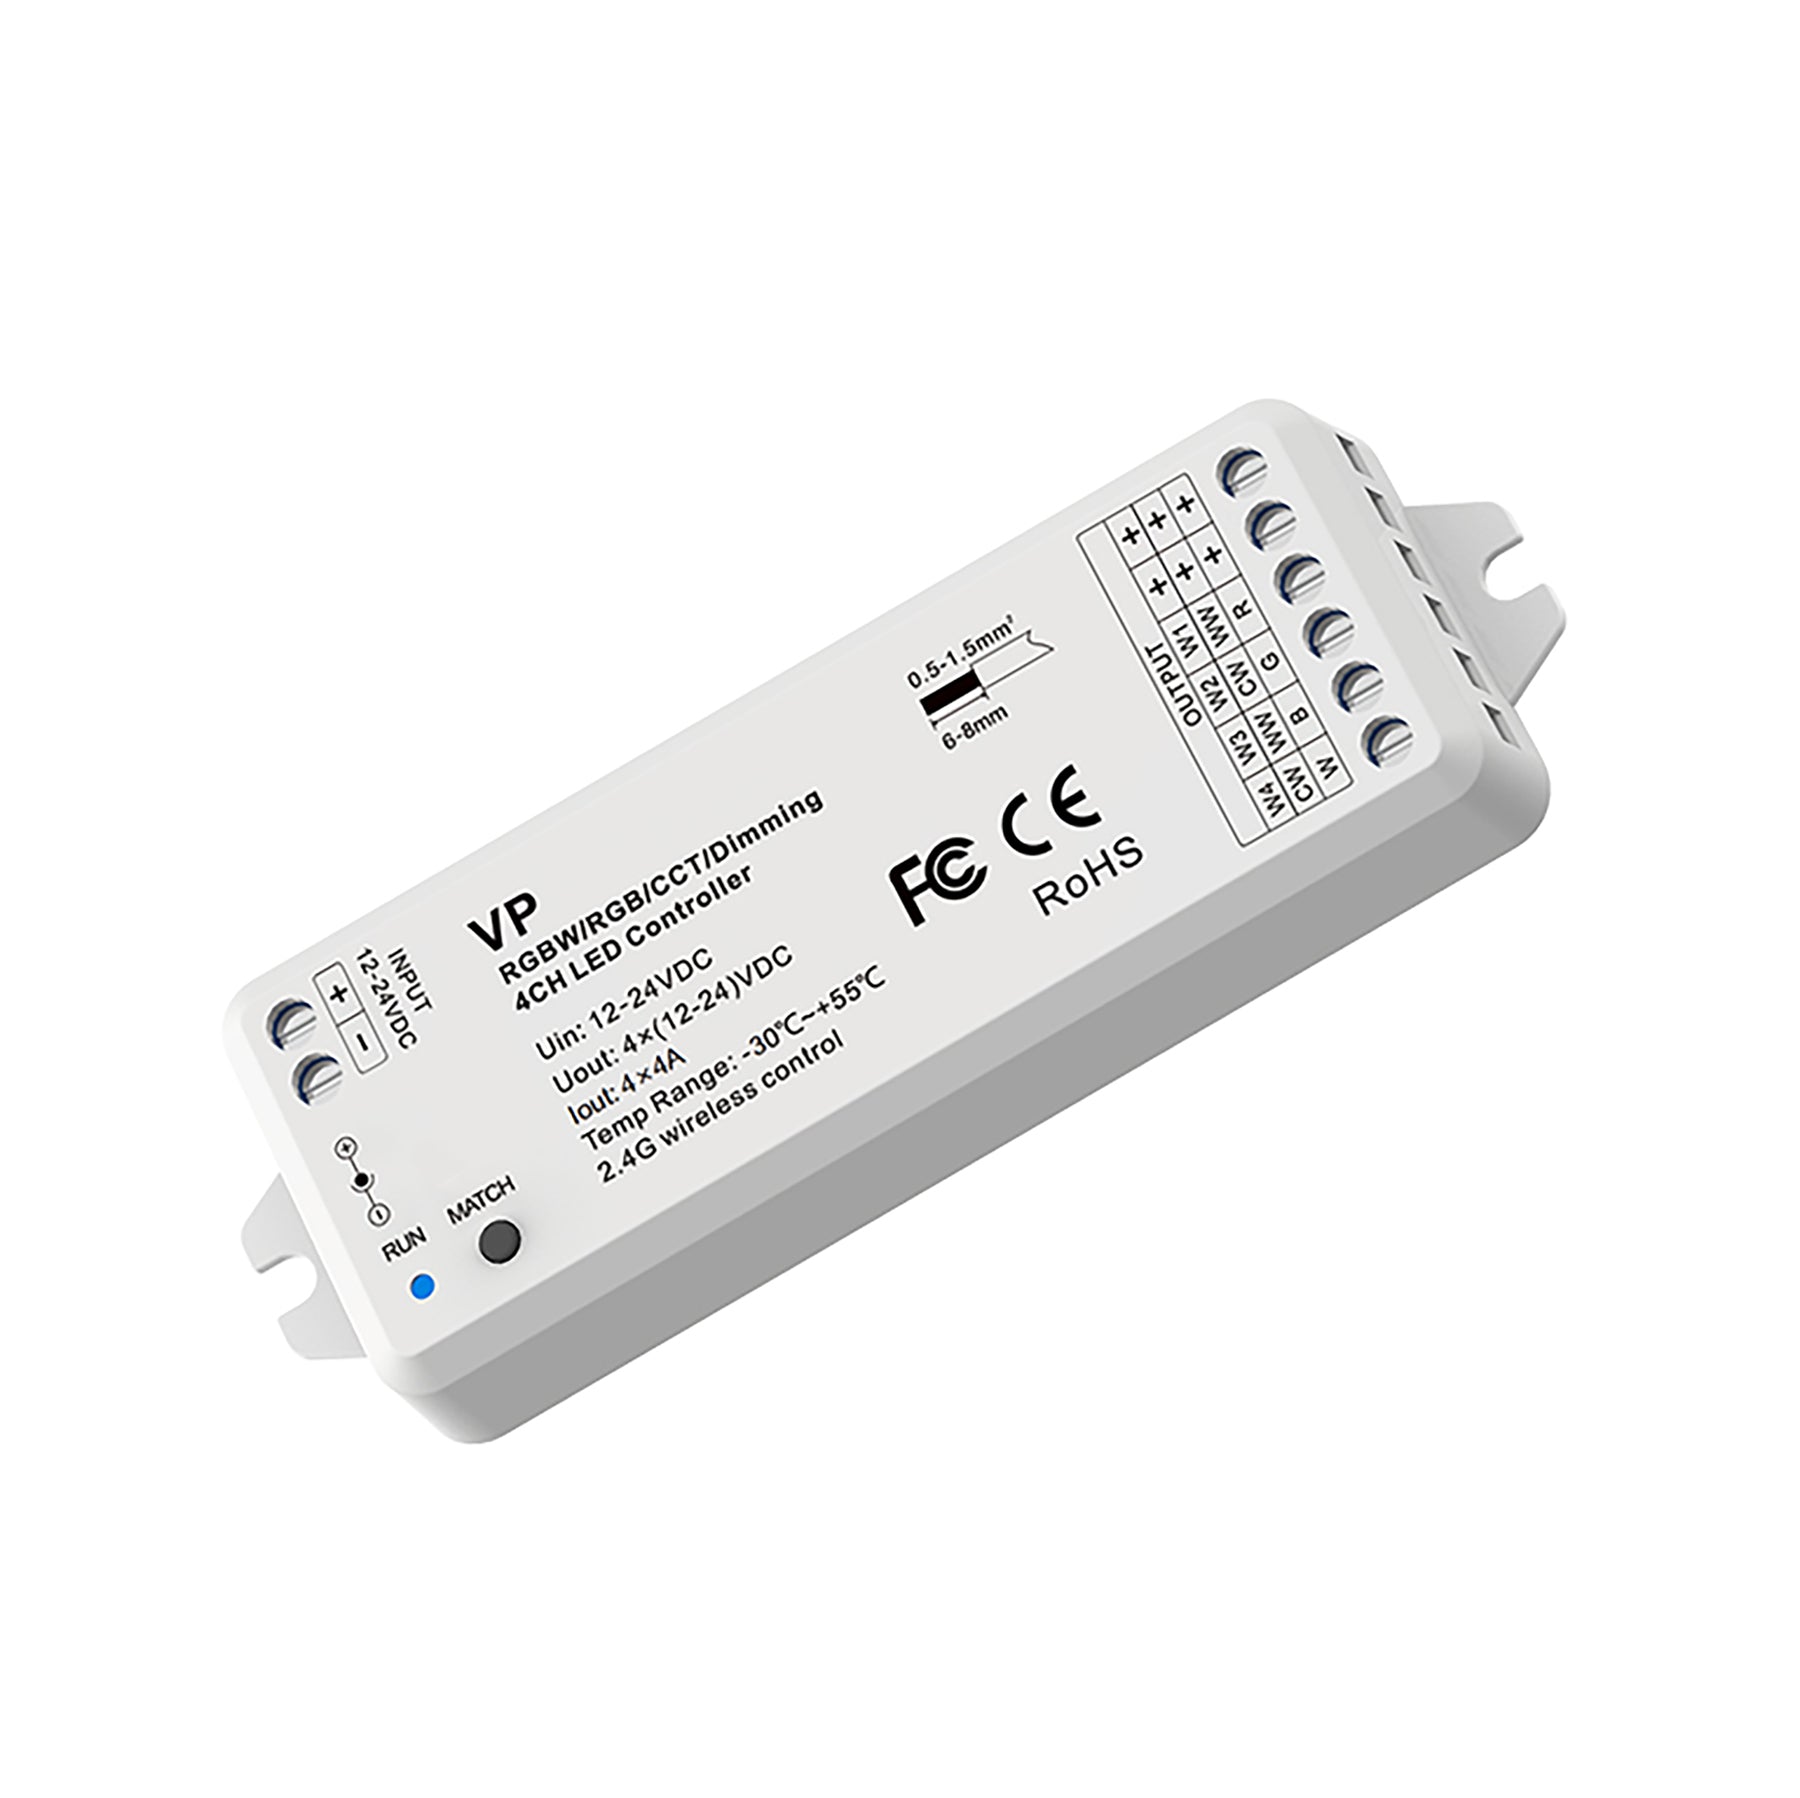 G.W.S. LED LED 12-24V DC RGB/RGBW Controller VP + 4 Zone Panel Remote Control 2*AAA Battery T24